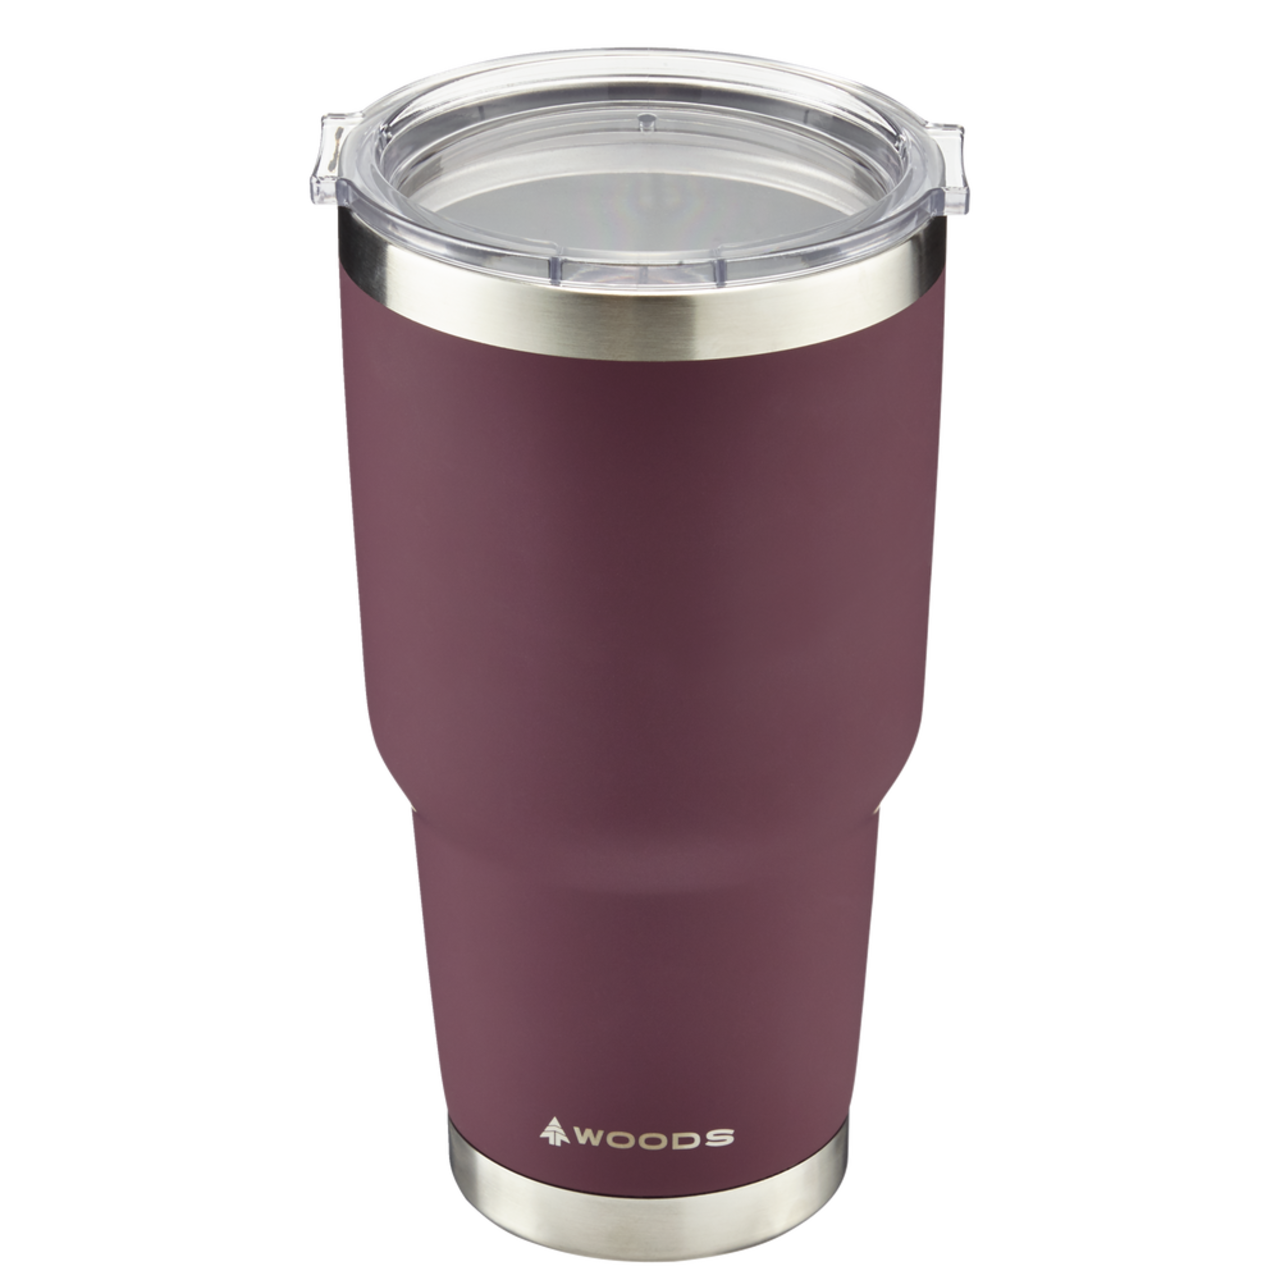 https://media-www.canadiantire.ca/product/playing/camping/camping-living/0766115/woods-tumbler-with-lid-890ml-afb40f40-eaf7-46e6-b1f1-852d6669f6da.png?imdensity=1&imwidth=1244&impolicy=mZoom